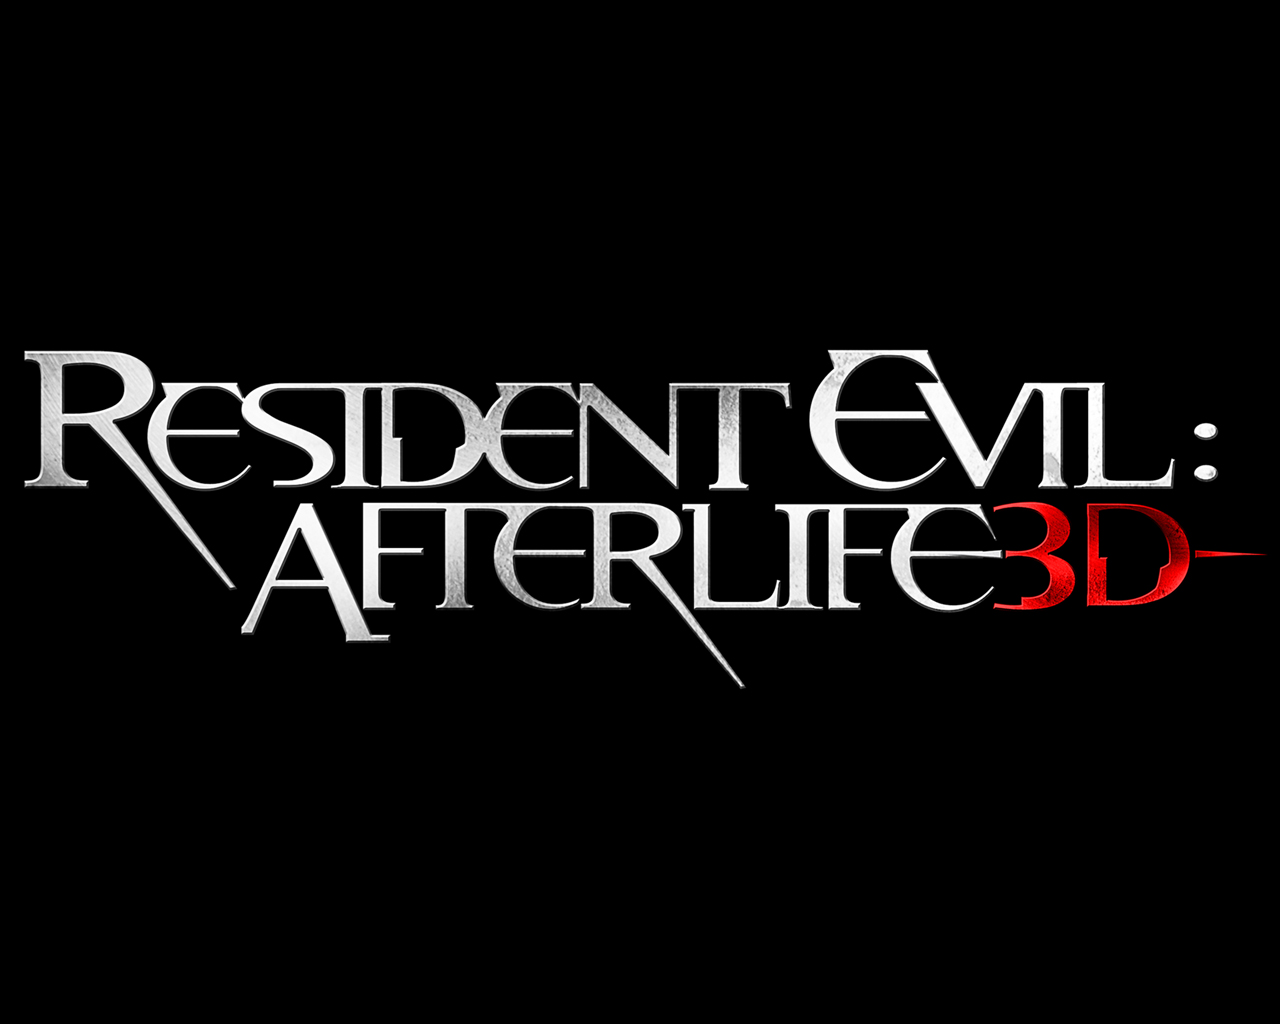 Download HQ Resident Evil AfterLife 3D wallpaper / Movies / 1280x1024